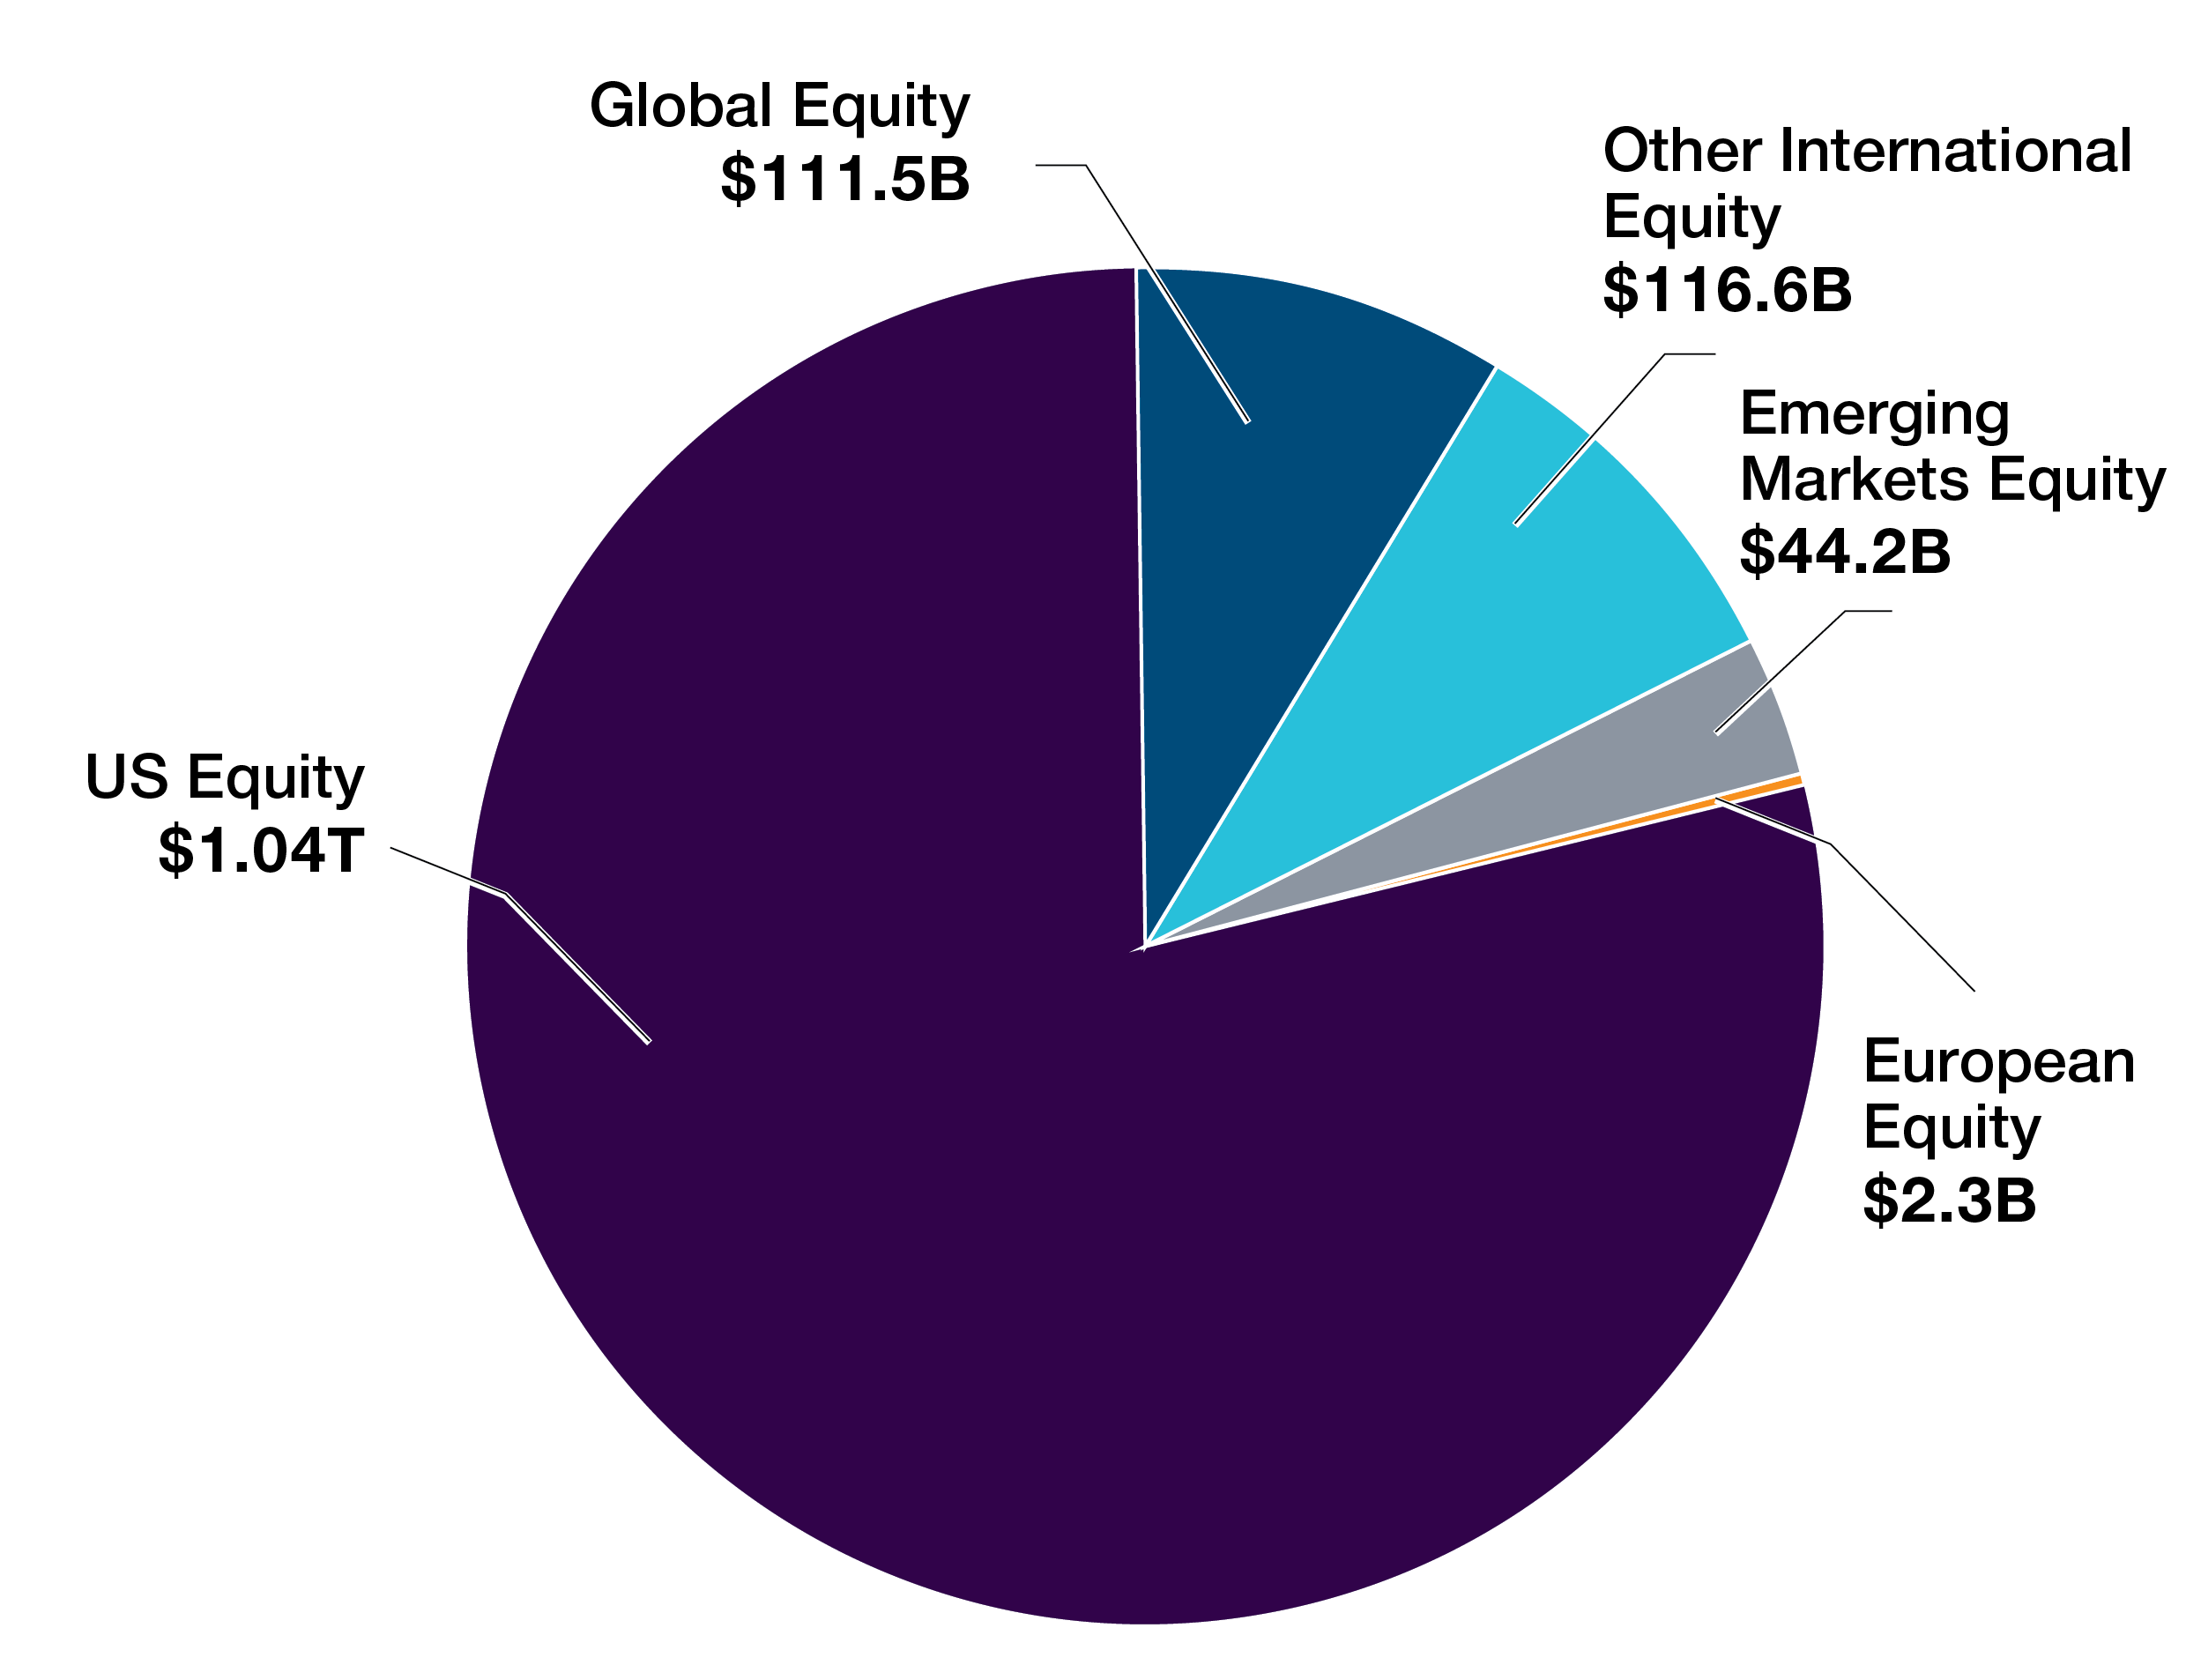 This graphic shows a breakdown of T. Rowe Price equity assets under management: $1.04T in US equity, $116.6B in other international equity, $11.5B in global equity, $44.3B in markets equity, and $2.3B in European equity.